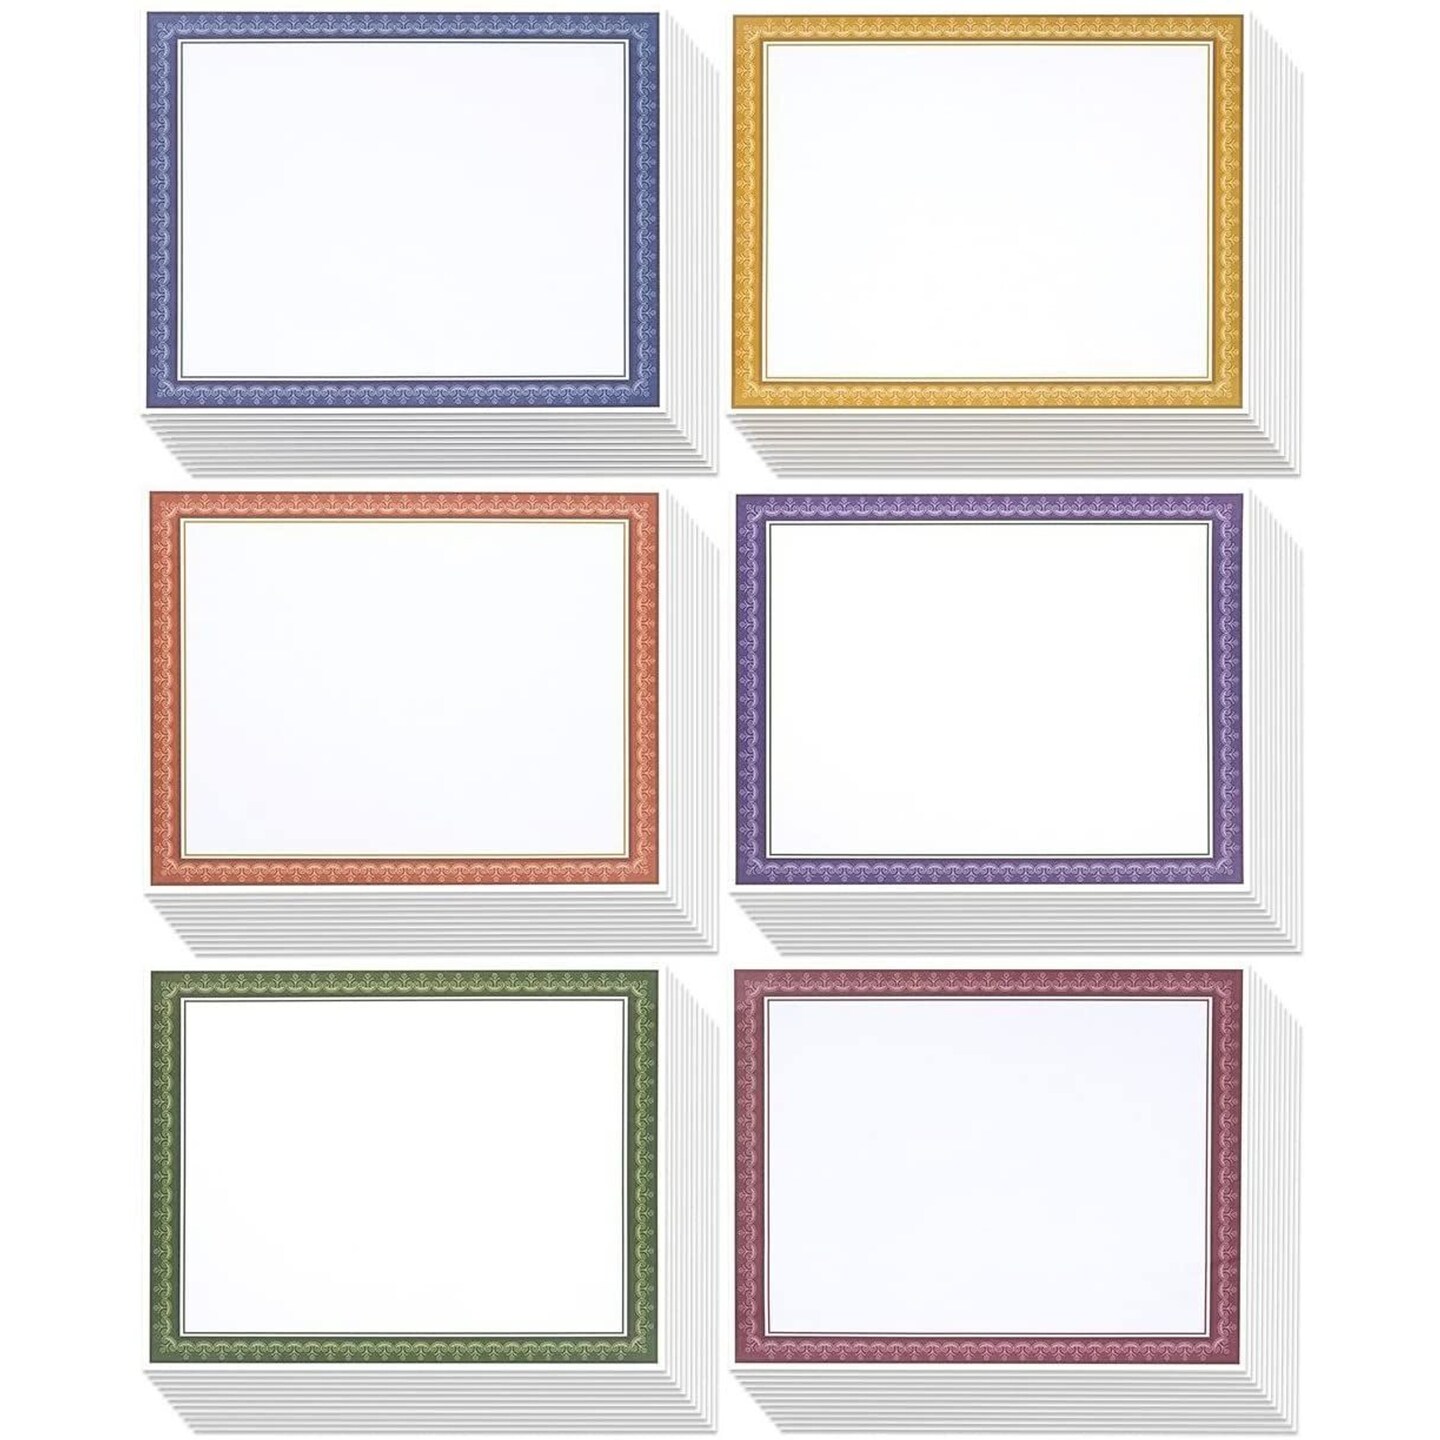 Cardstock Paper: Assorted White & Colored Cardstock for Schools